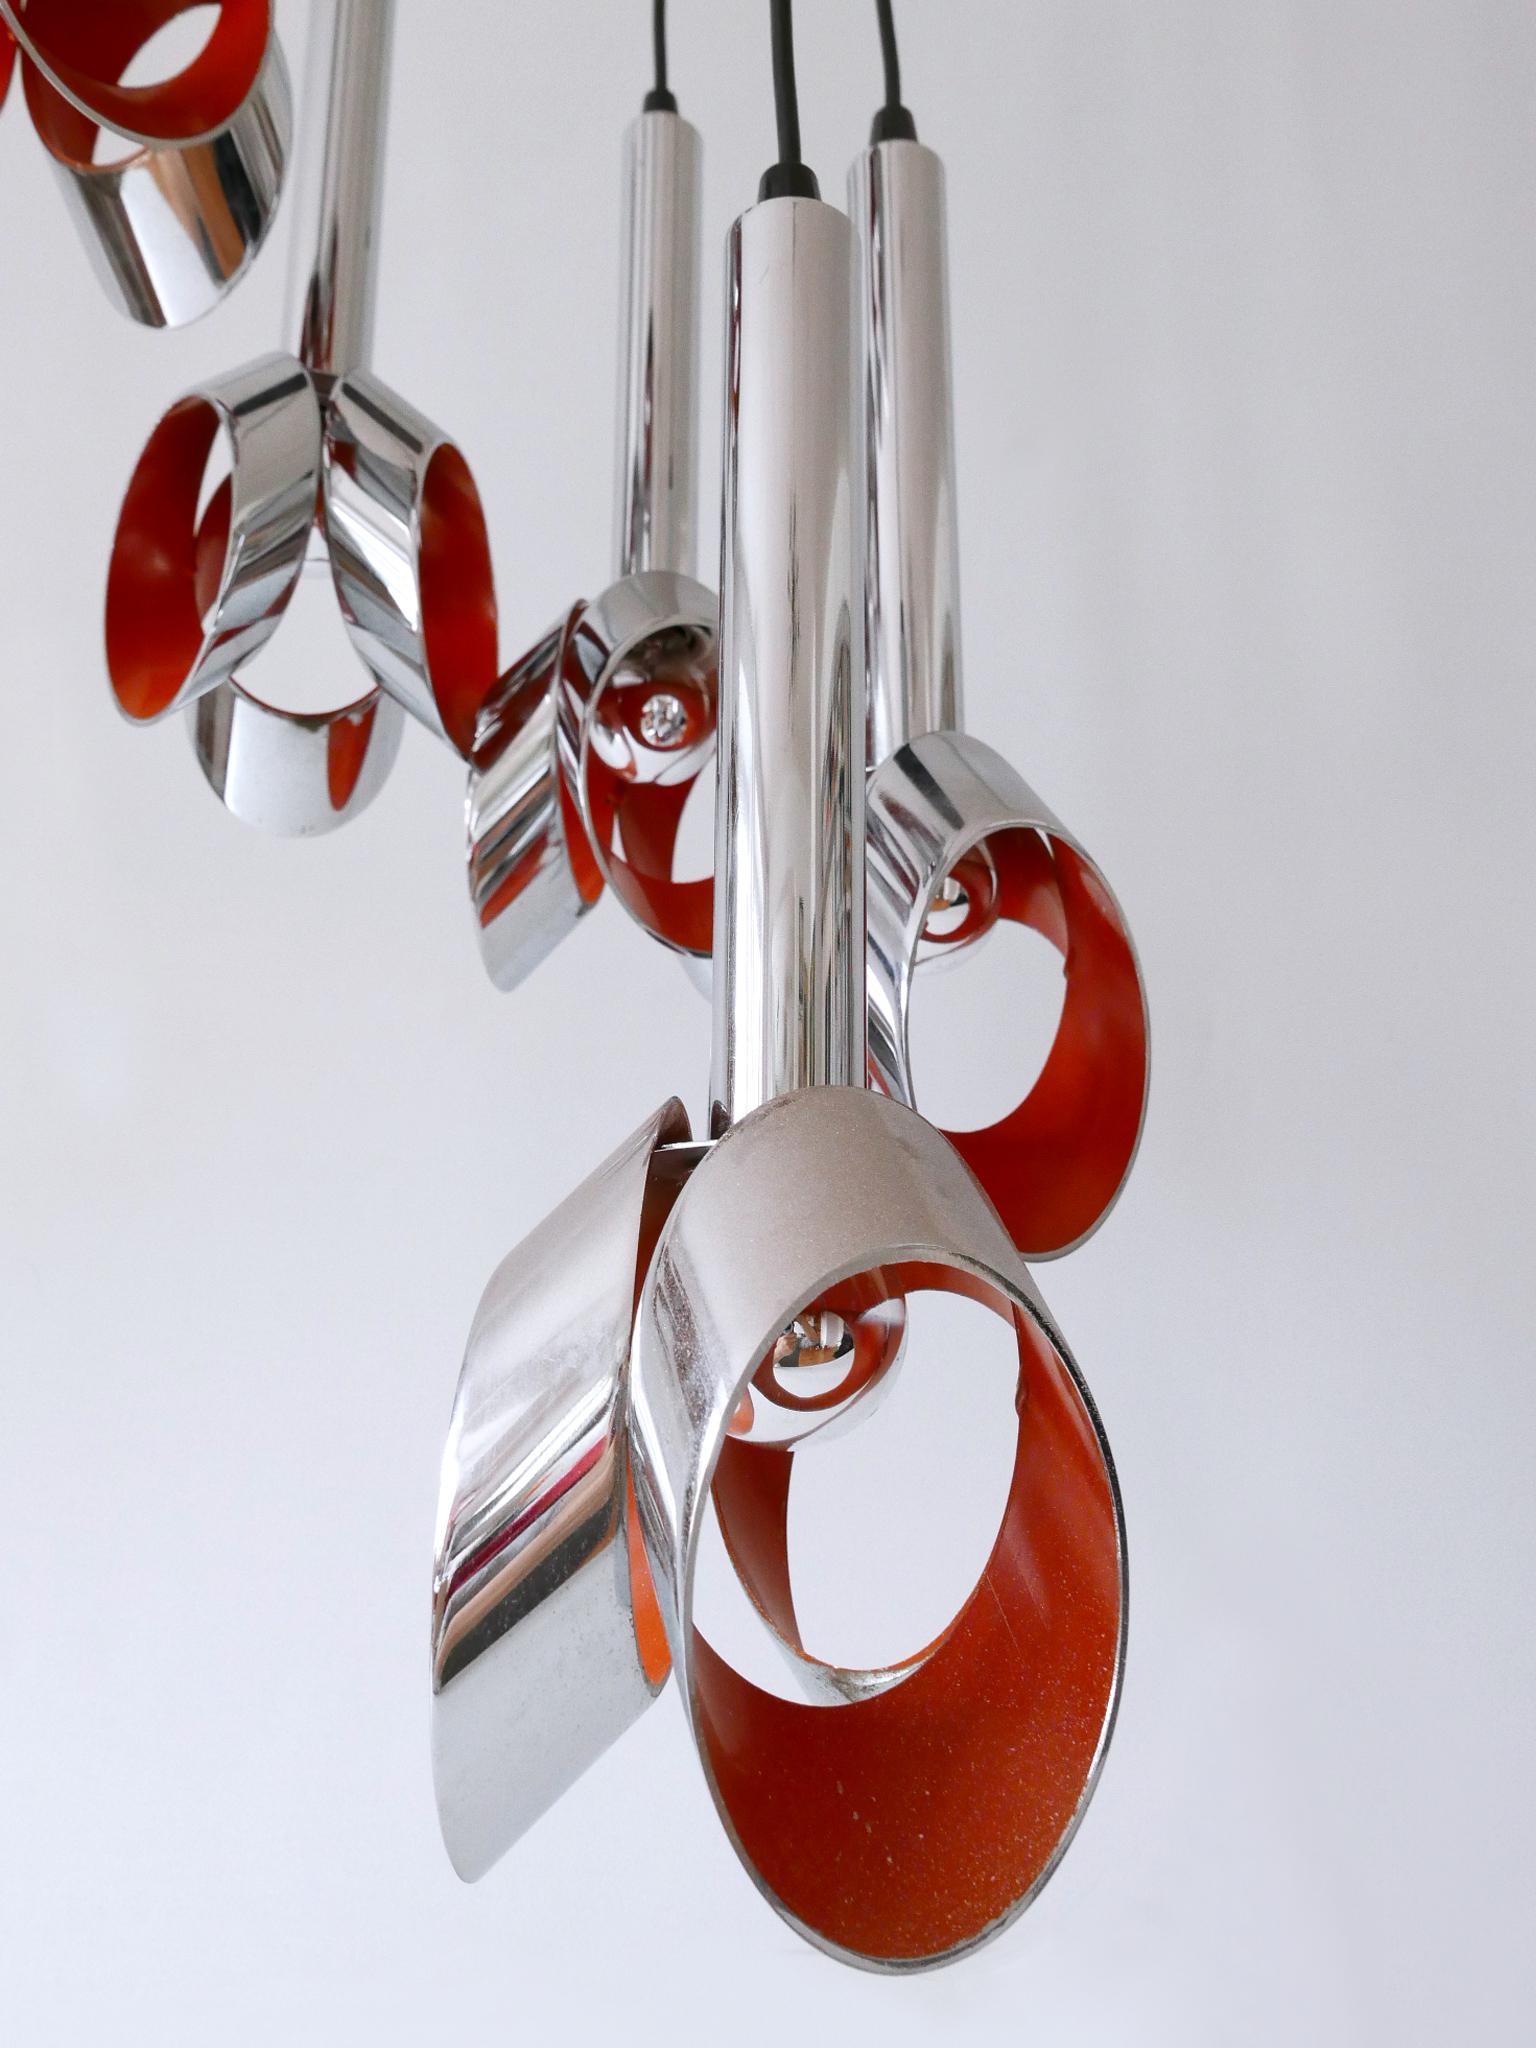 Exceptional Mid-Century Modern Six-Armed Tulip Chandelier or Pendant Lamp, 1970s For Sale 7